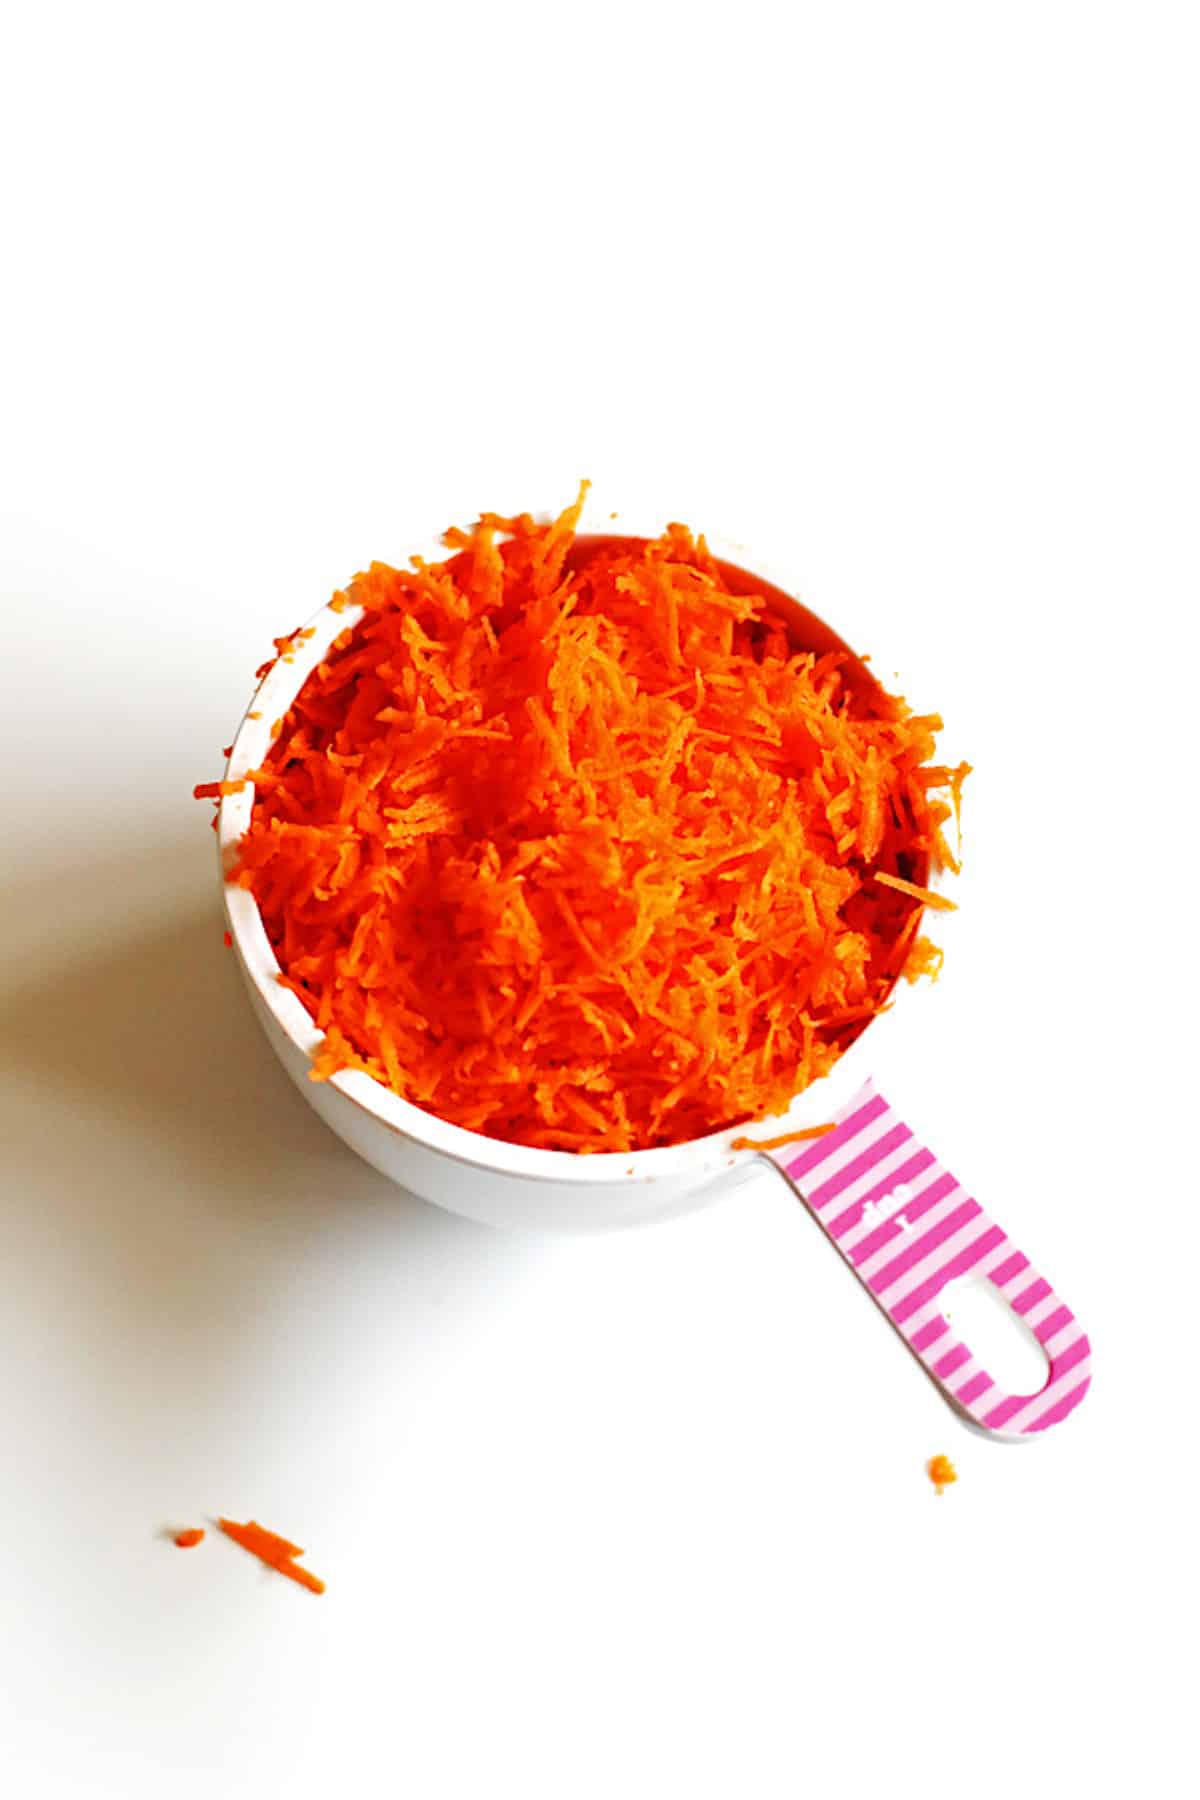 Shredded carrots in white and pink measuring cup